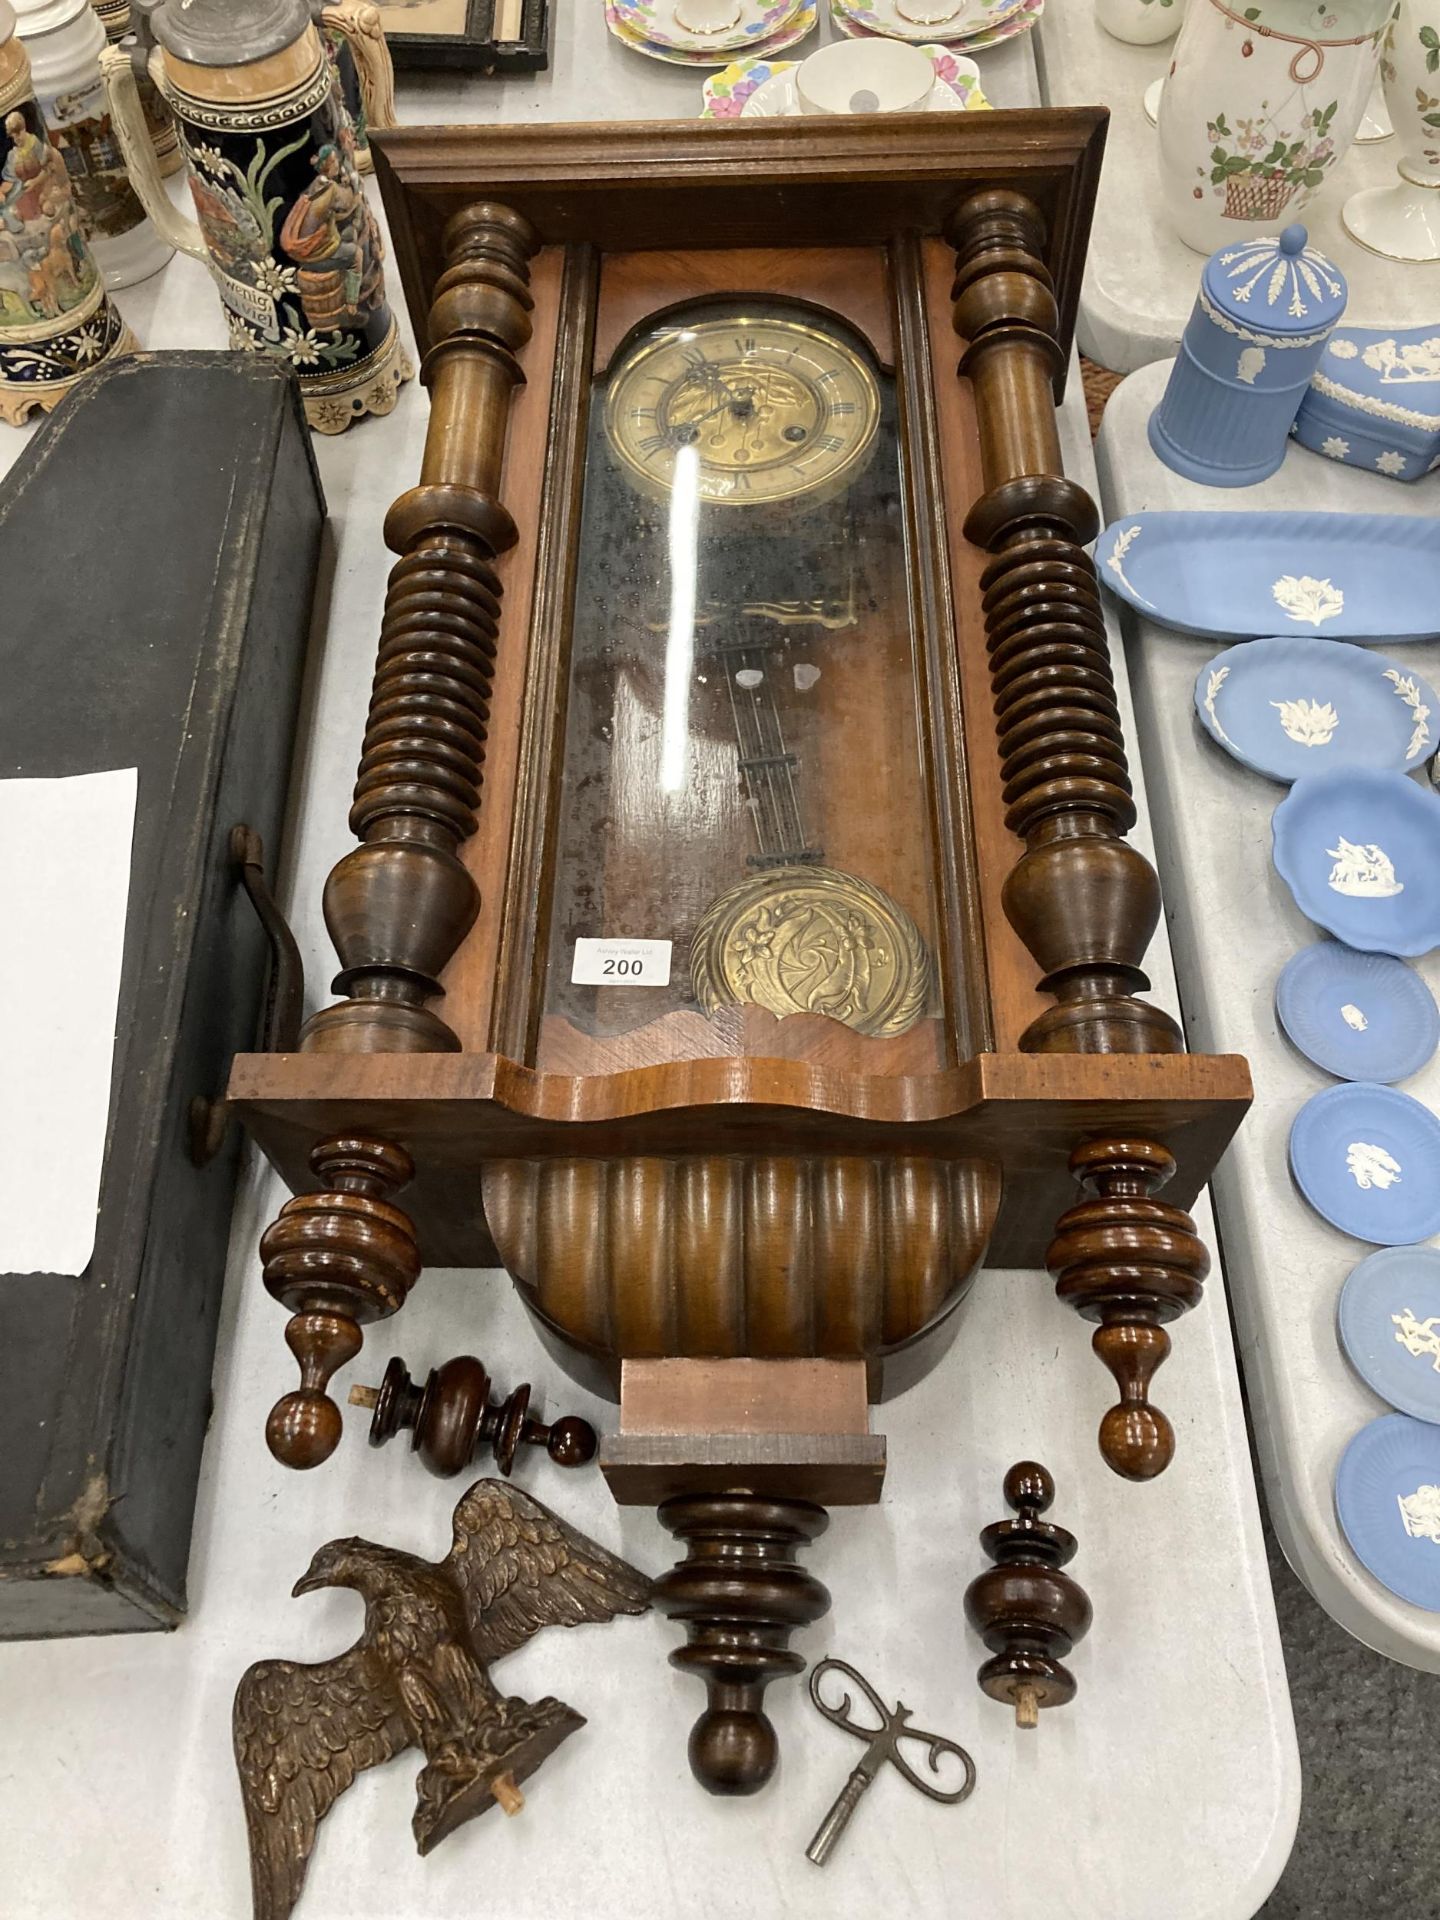 A MAHOGANY CASED VIENNA WALL CLOCK WITH EAGLE DESIGN TOP, WITH PENDULUM AND KEY - Image 2 of 7